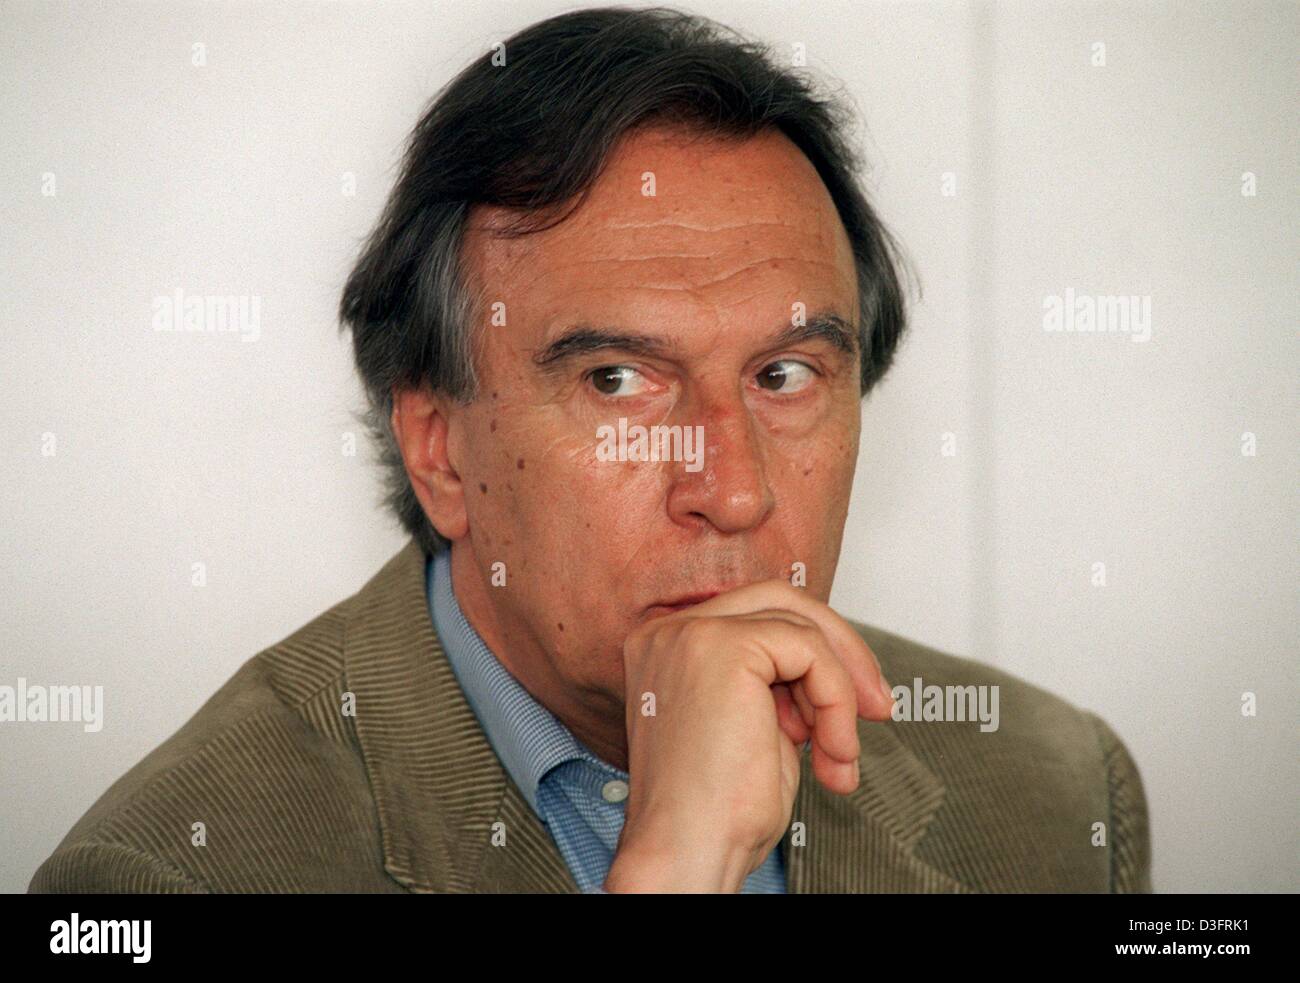 (dpa files) - Italian conductor Claudio Abbado pictured during a press conference in Berlin, 27 April 1998. Abbado was born in Milan, Italy, on 26 June 1933. He studied piano at the conservatory in Milan before beginning to conduct in Vienna. In 1960 he made his debut at La Scala in his native Milan in 1960 and served as music director there from 1968 to 1986. In 1989 he succeeded  Stock Photo